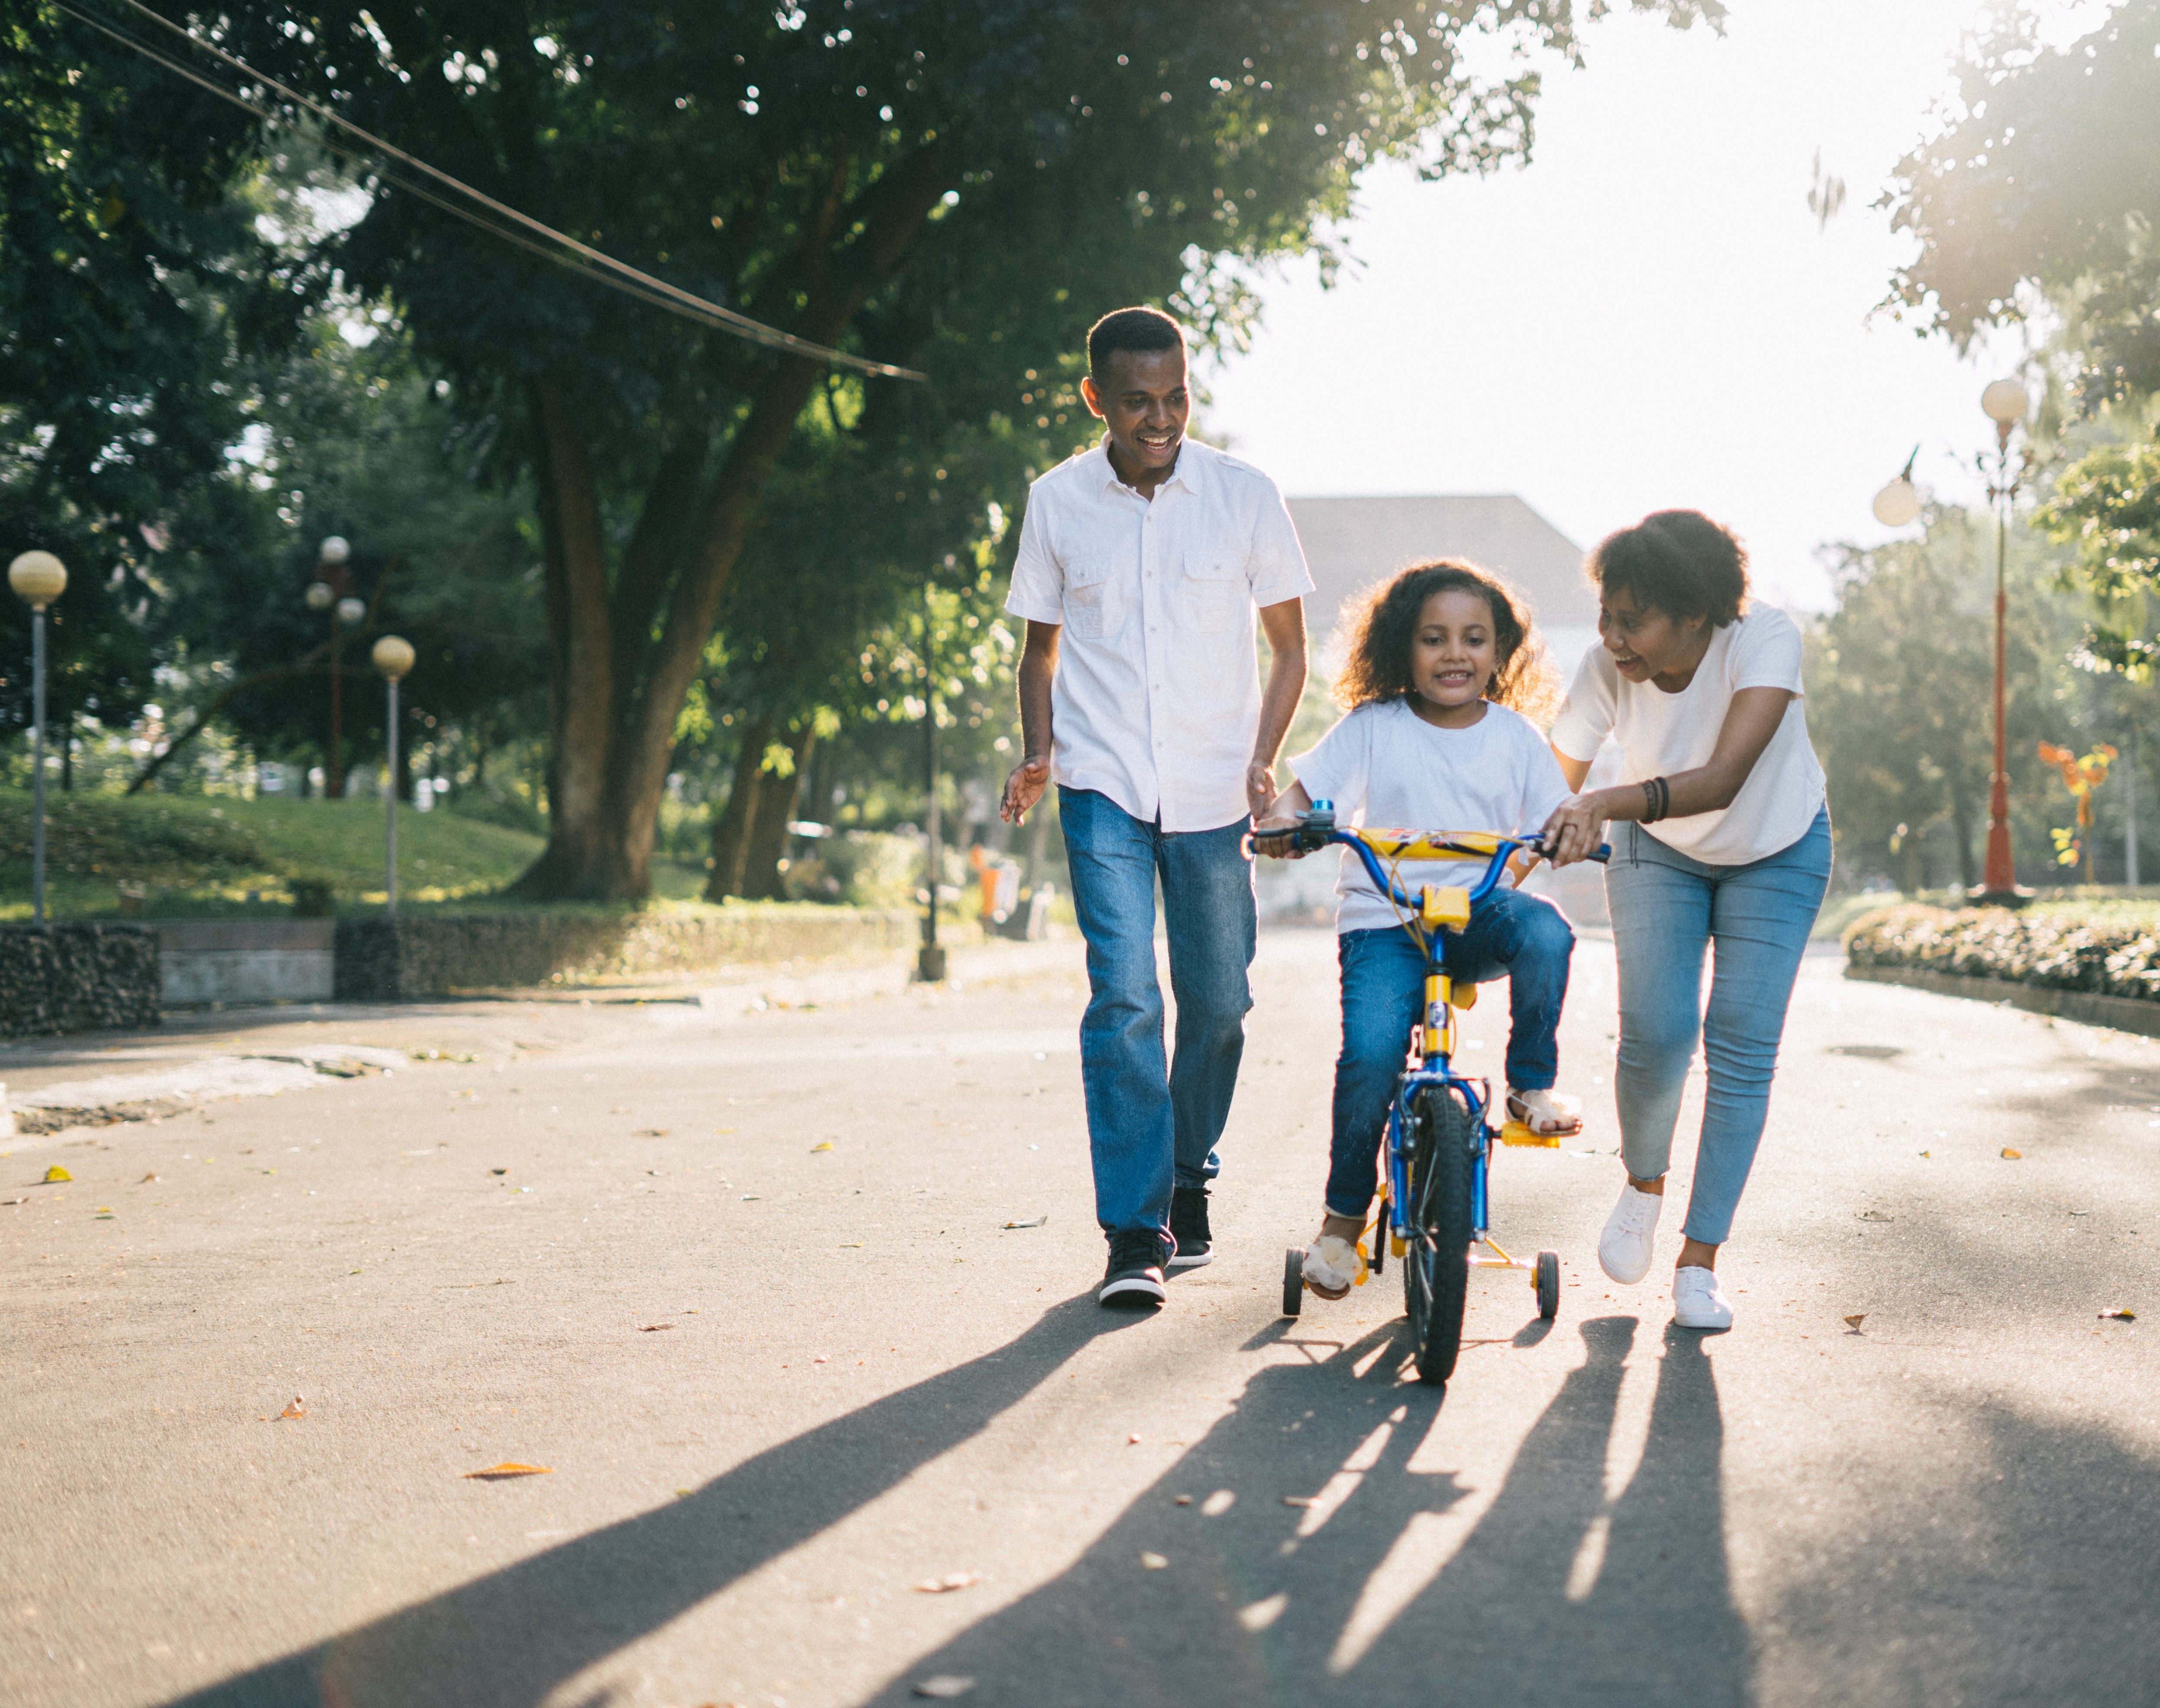 image of mom and dad helping daughter learn to ride bike